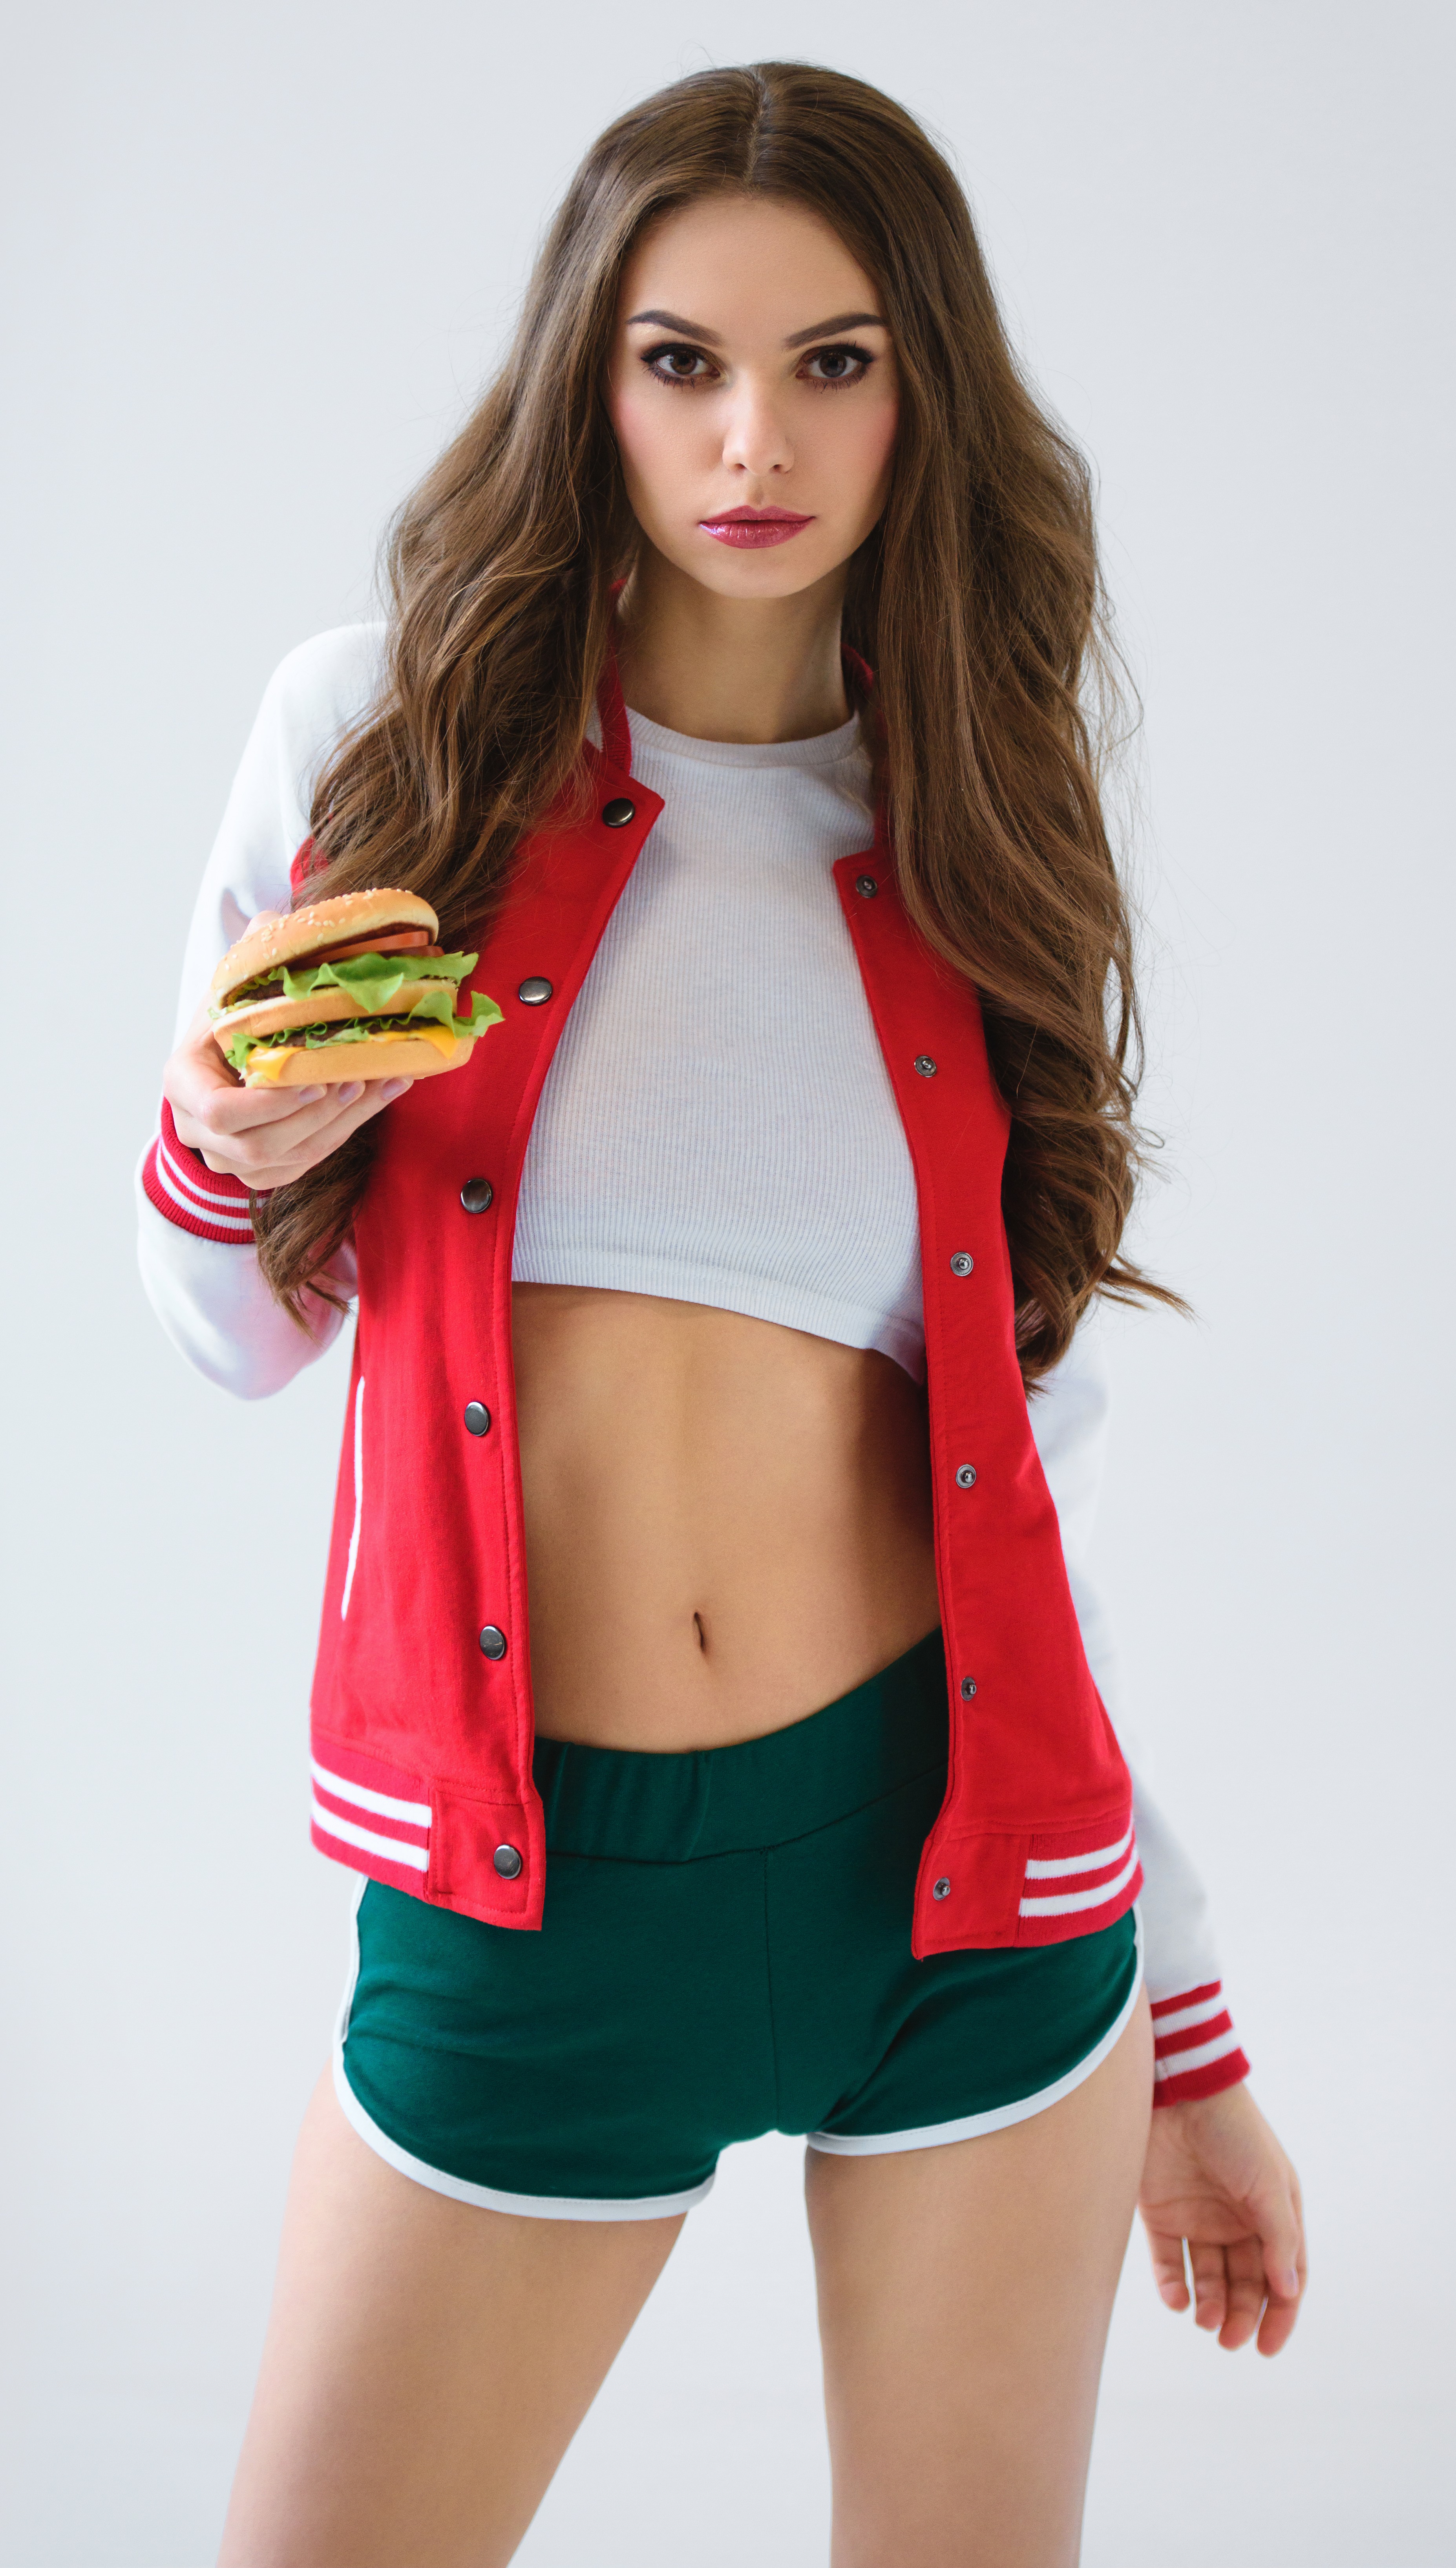 Brunette Jacket Burgers Short Tops White Tops Long Hair White Background Looking At Viewer Standing  3709x6540